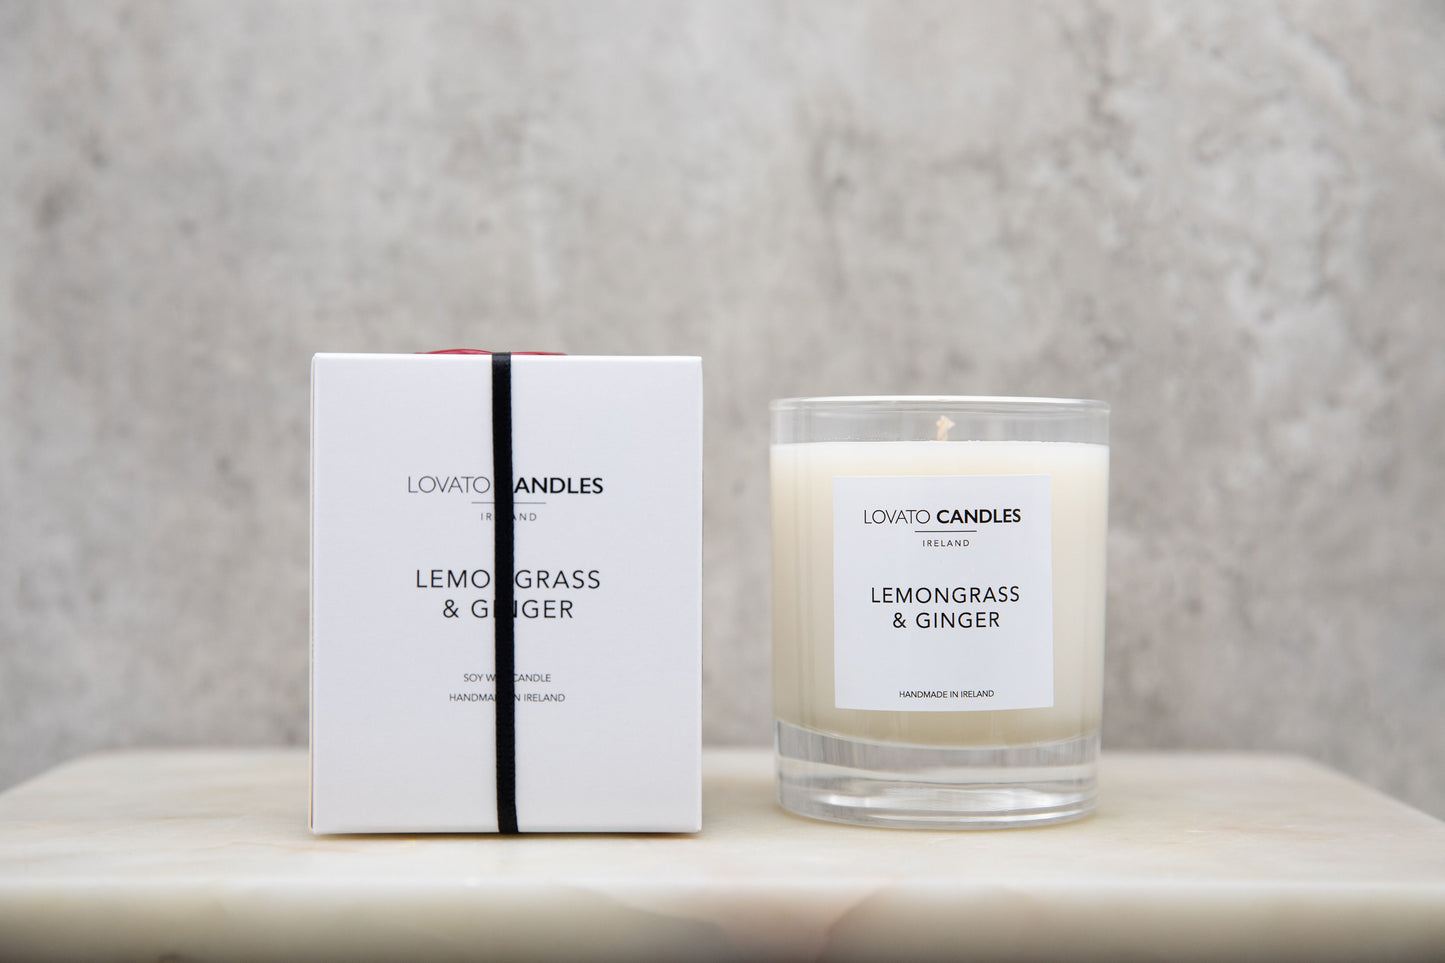 Clear Scented Candle with Luxury White Box - Lemongrass & Ginger